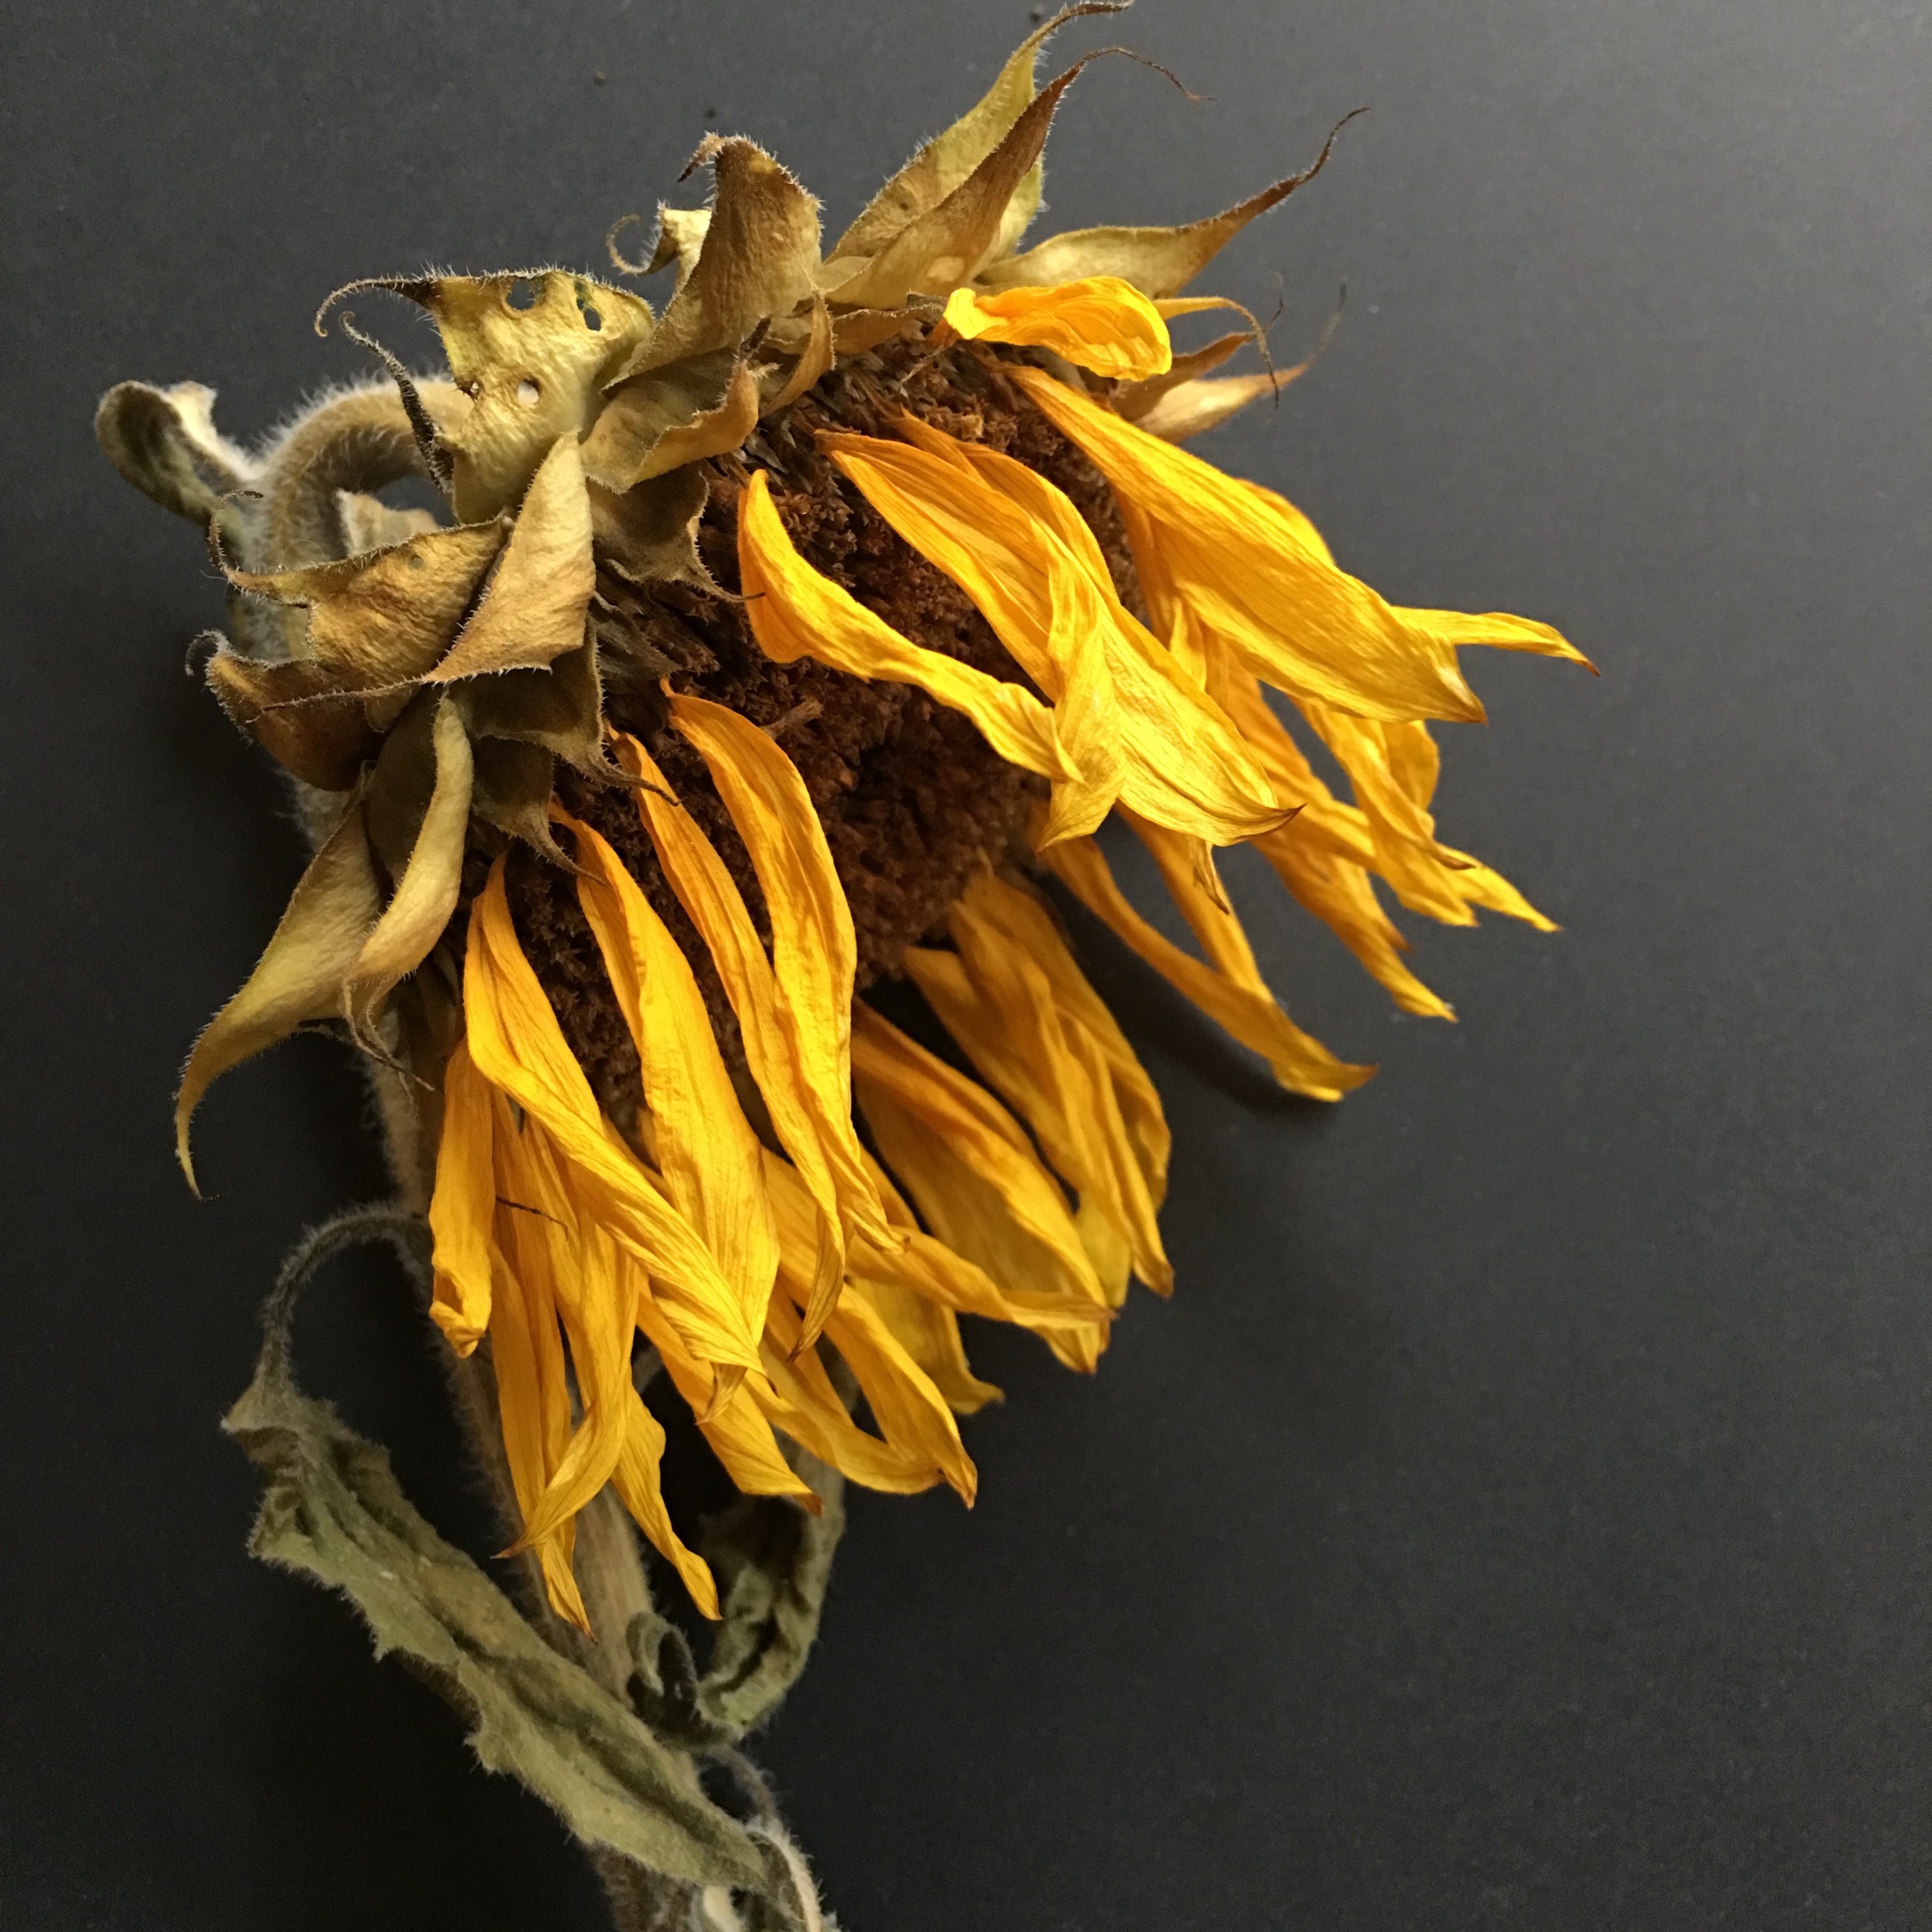 Photography Trends: Tips for Taking Photos of Dead & Dying Flowers ...